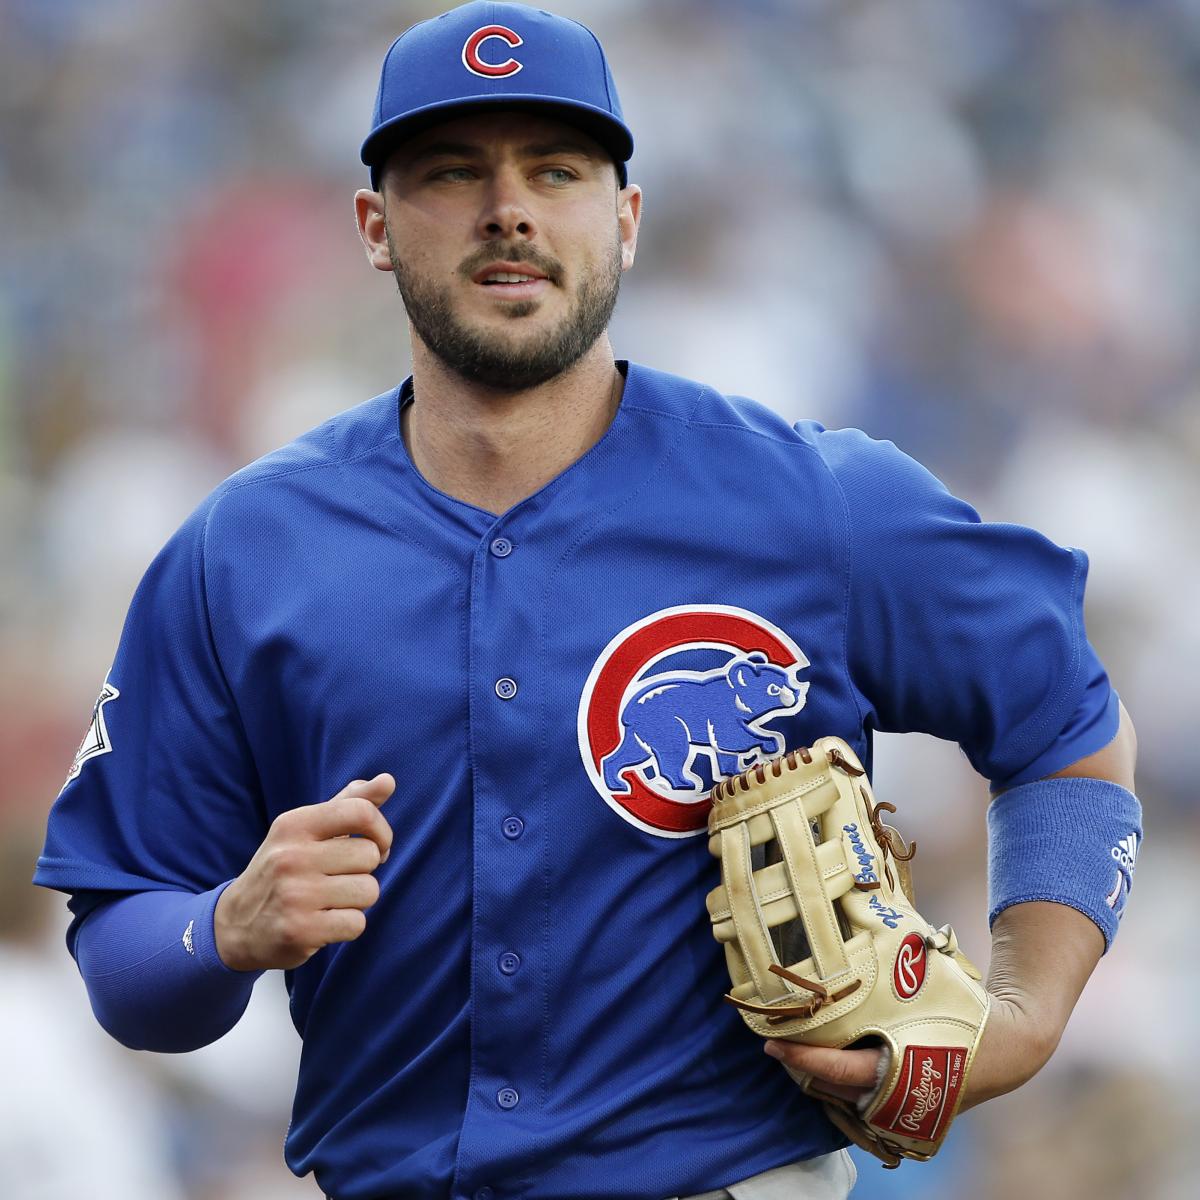 How Kris Bryant fell under Giants' spell long before trade from Cubs